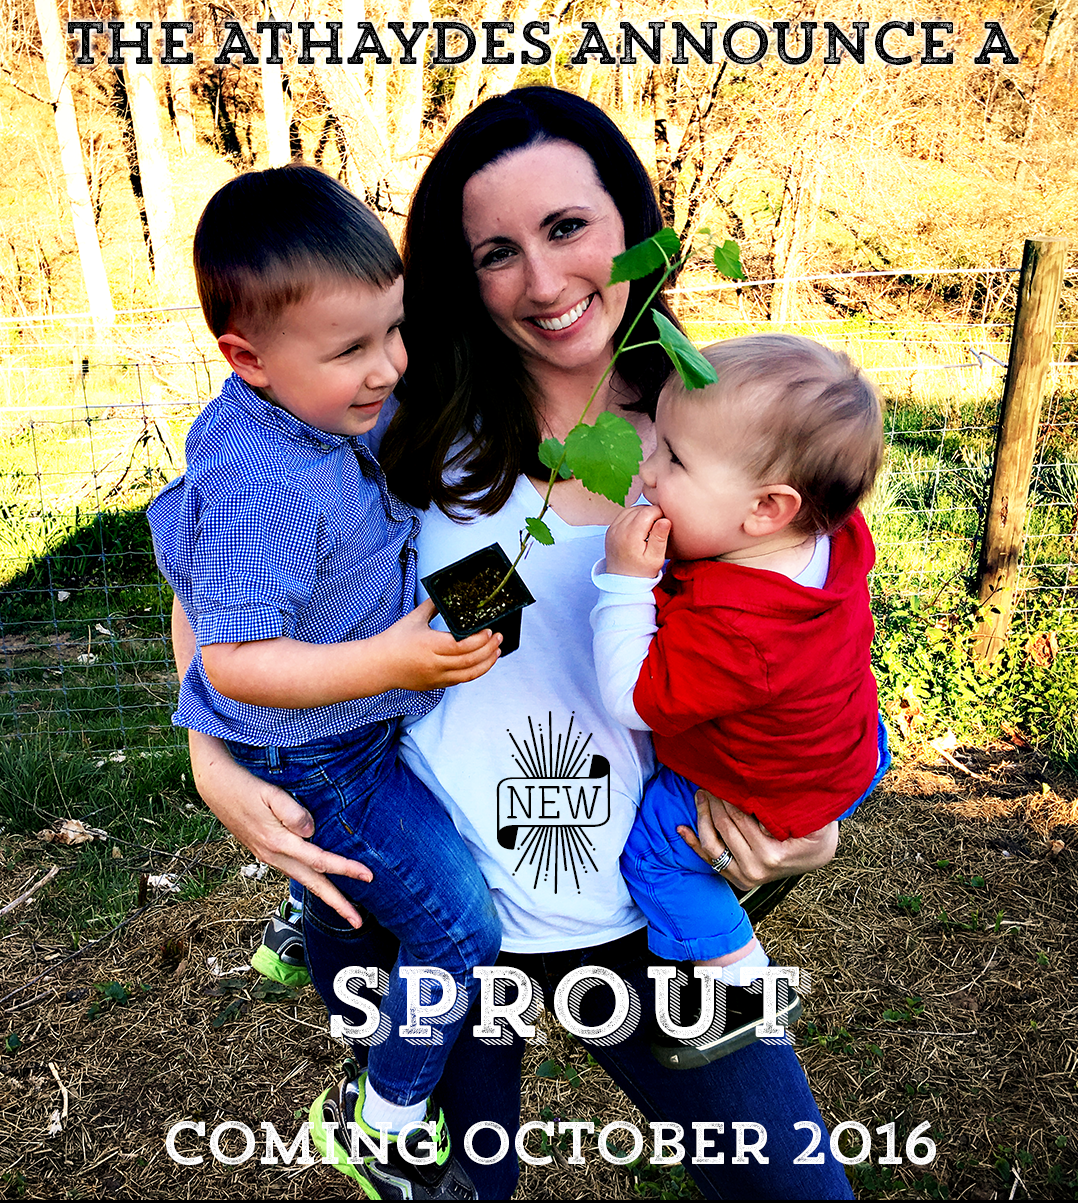 Our newest sprout!